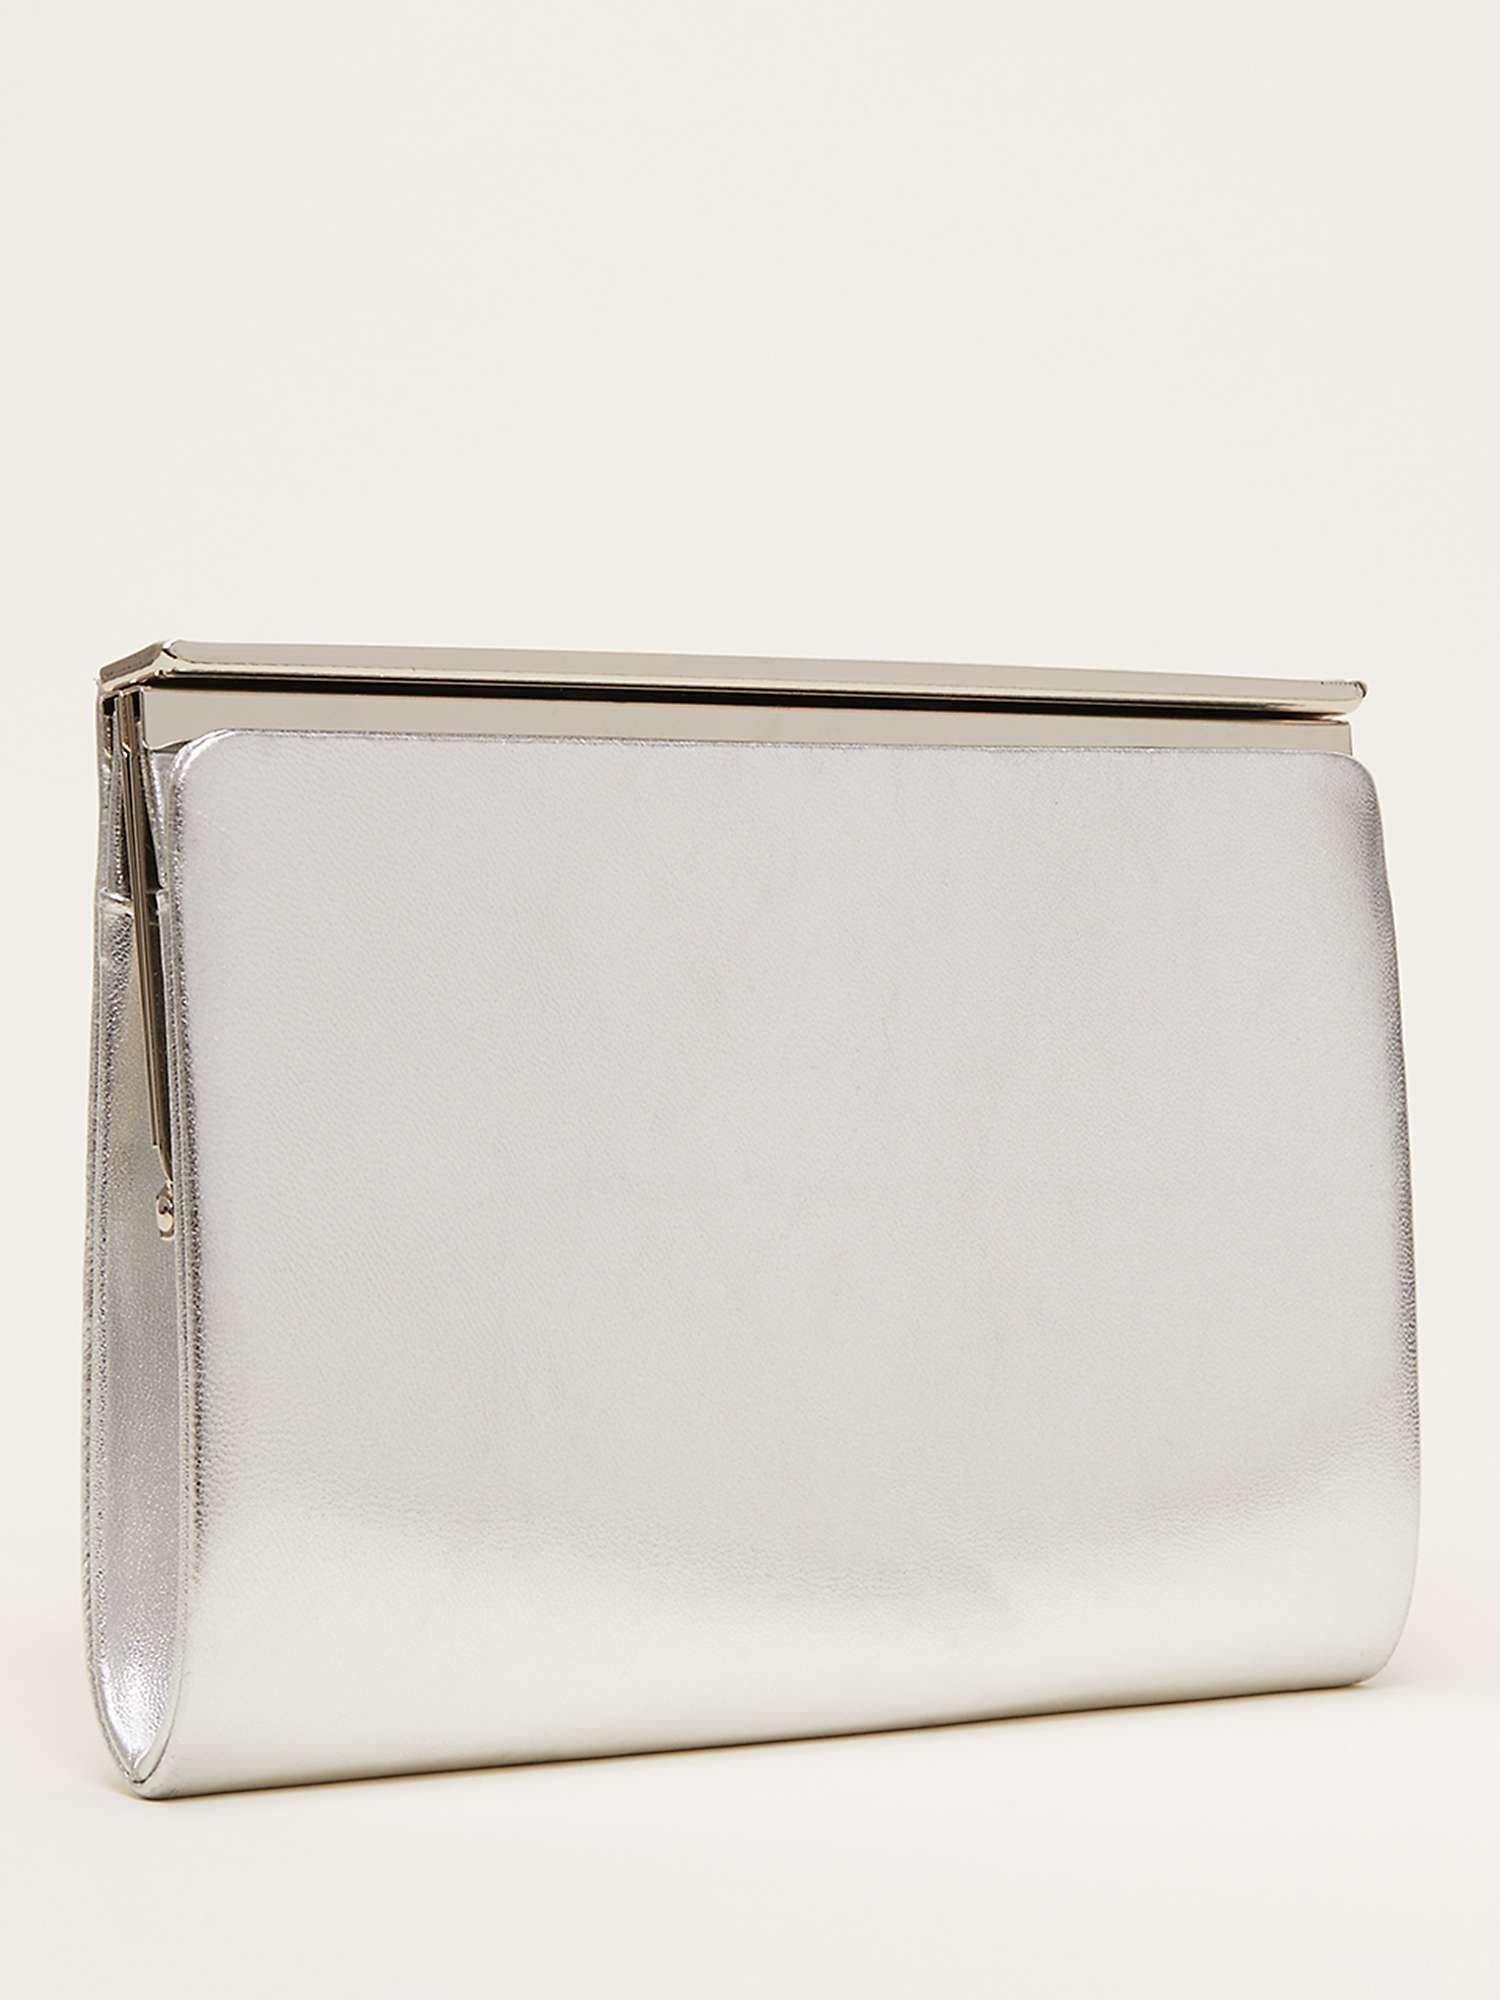 Phase Eight Patent Open Top Slim Clutch Bag, Silver at John Lewis ...